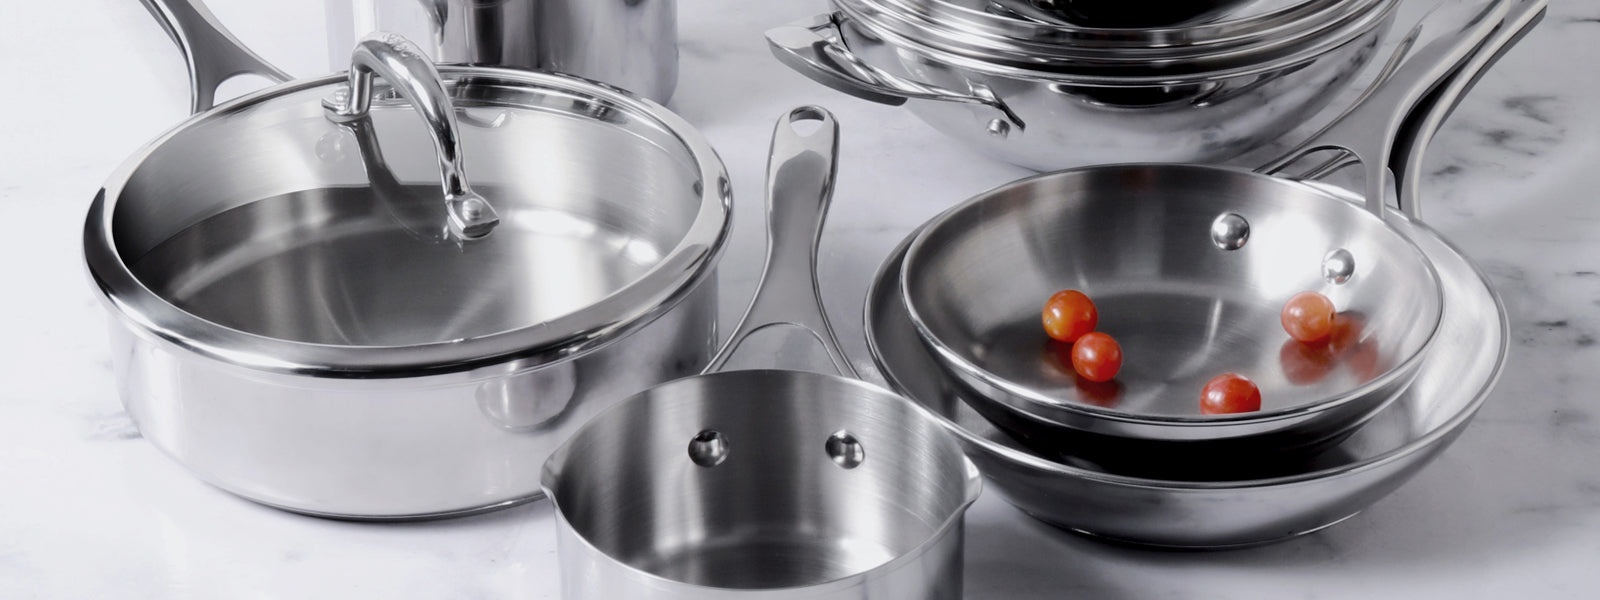 Best Pans That Chefs Use In India from potsandpans.in